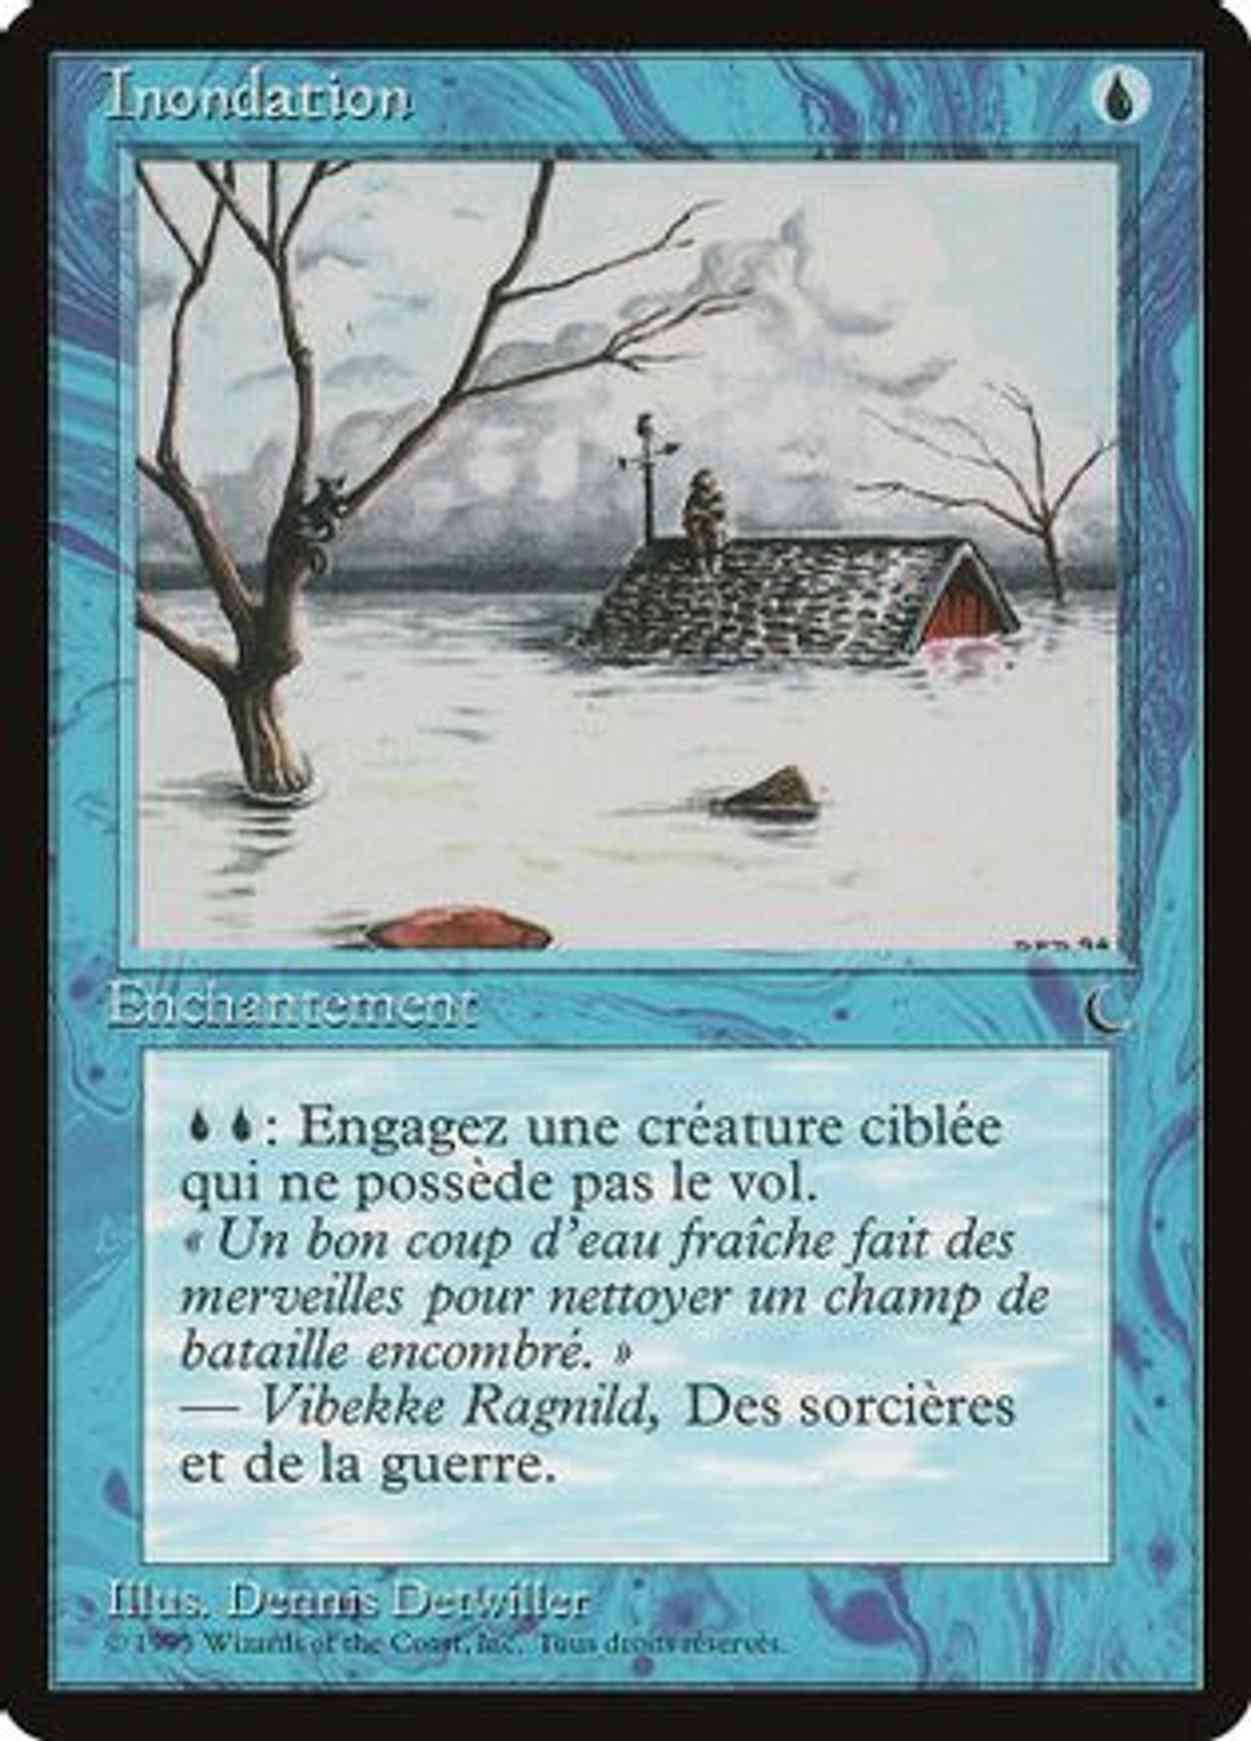 Flood (French) - "Inondation" magic card front